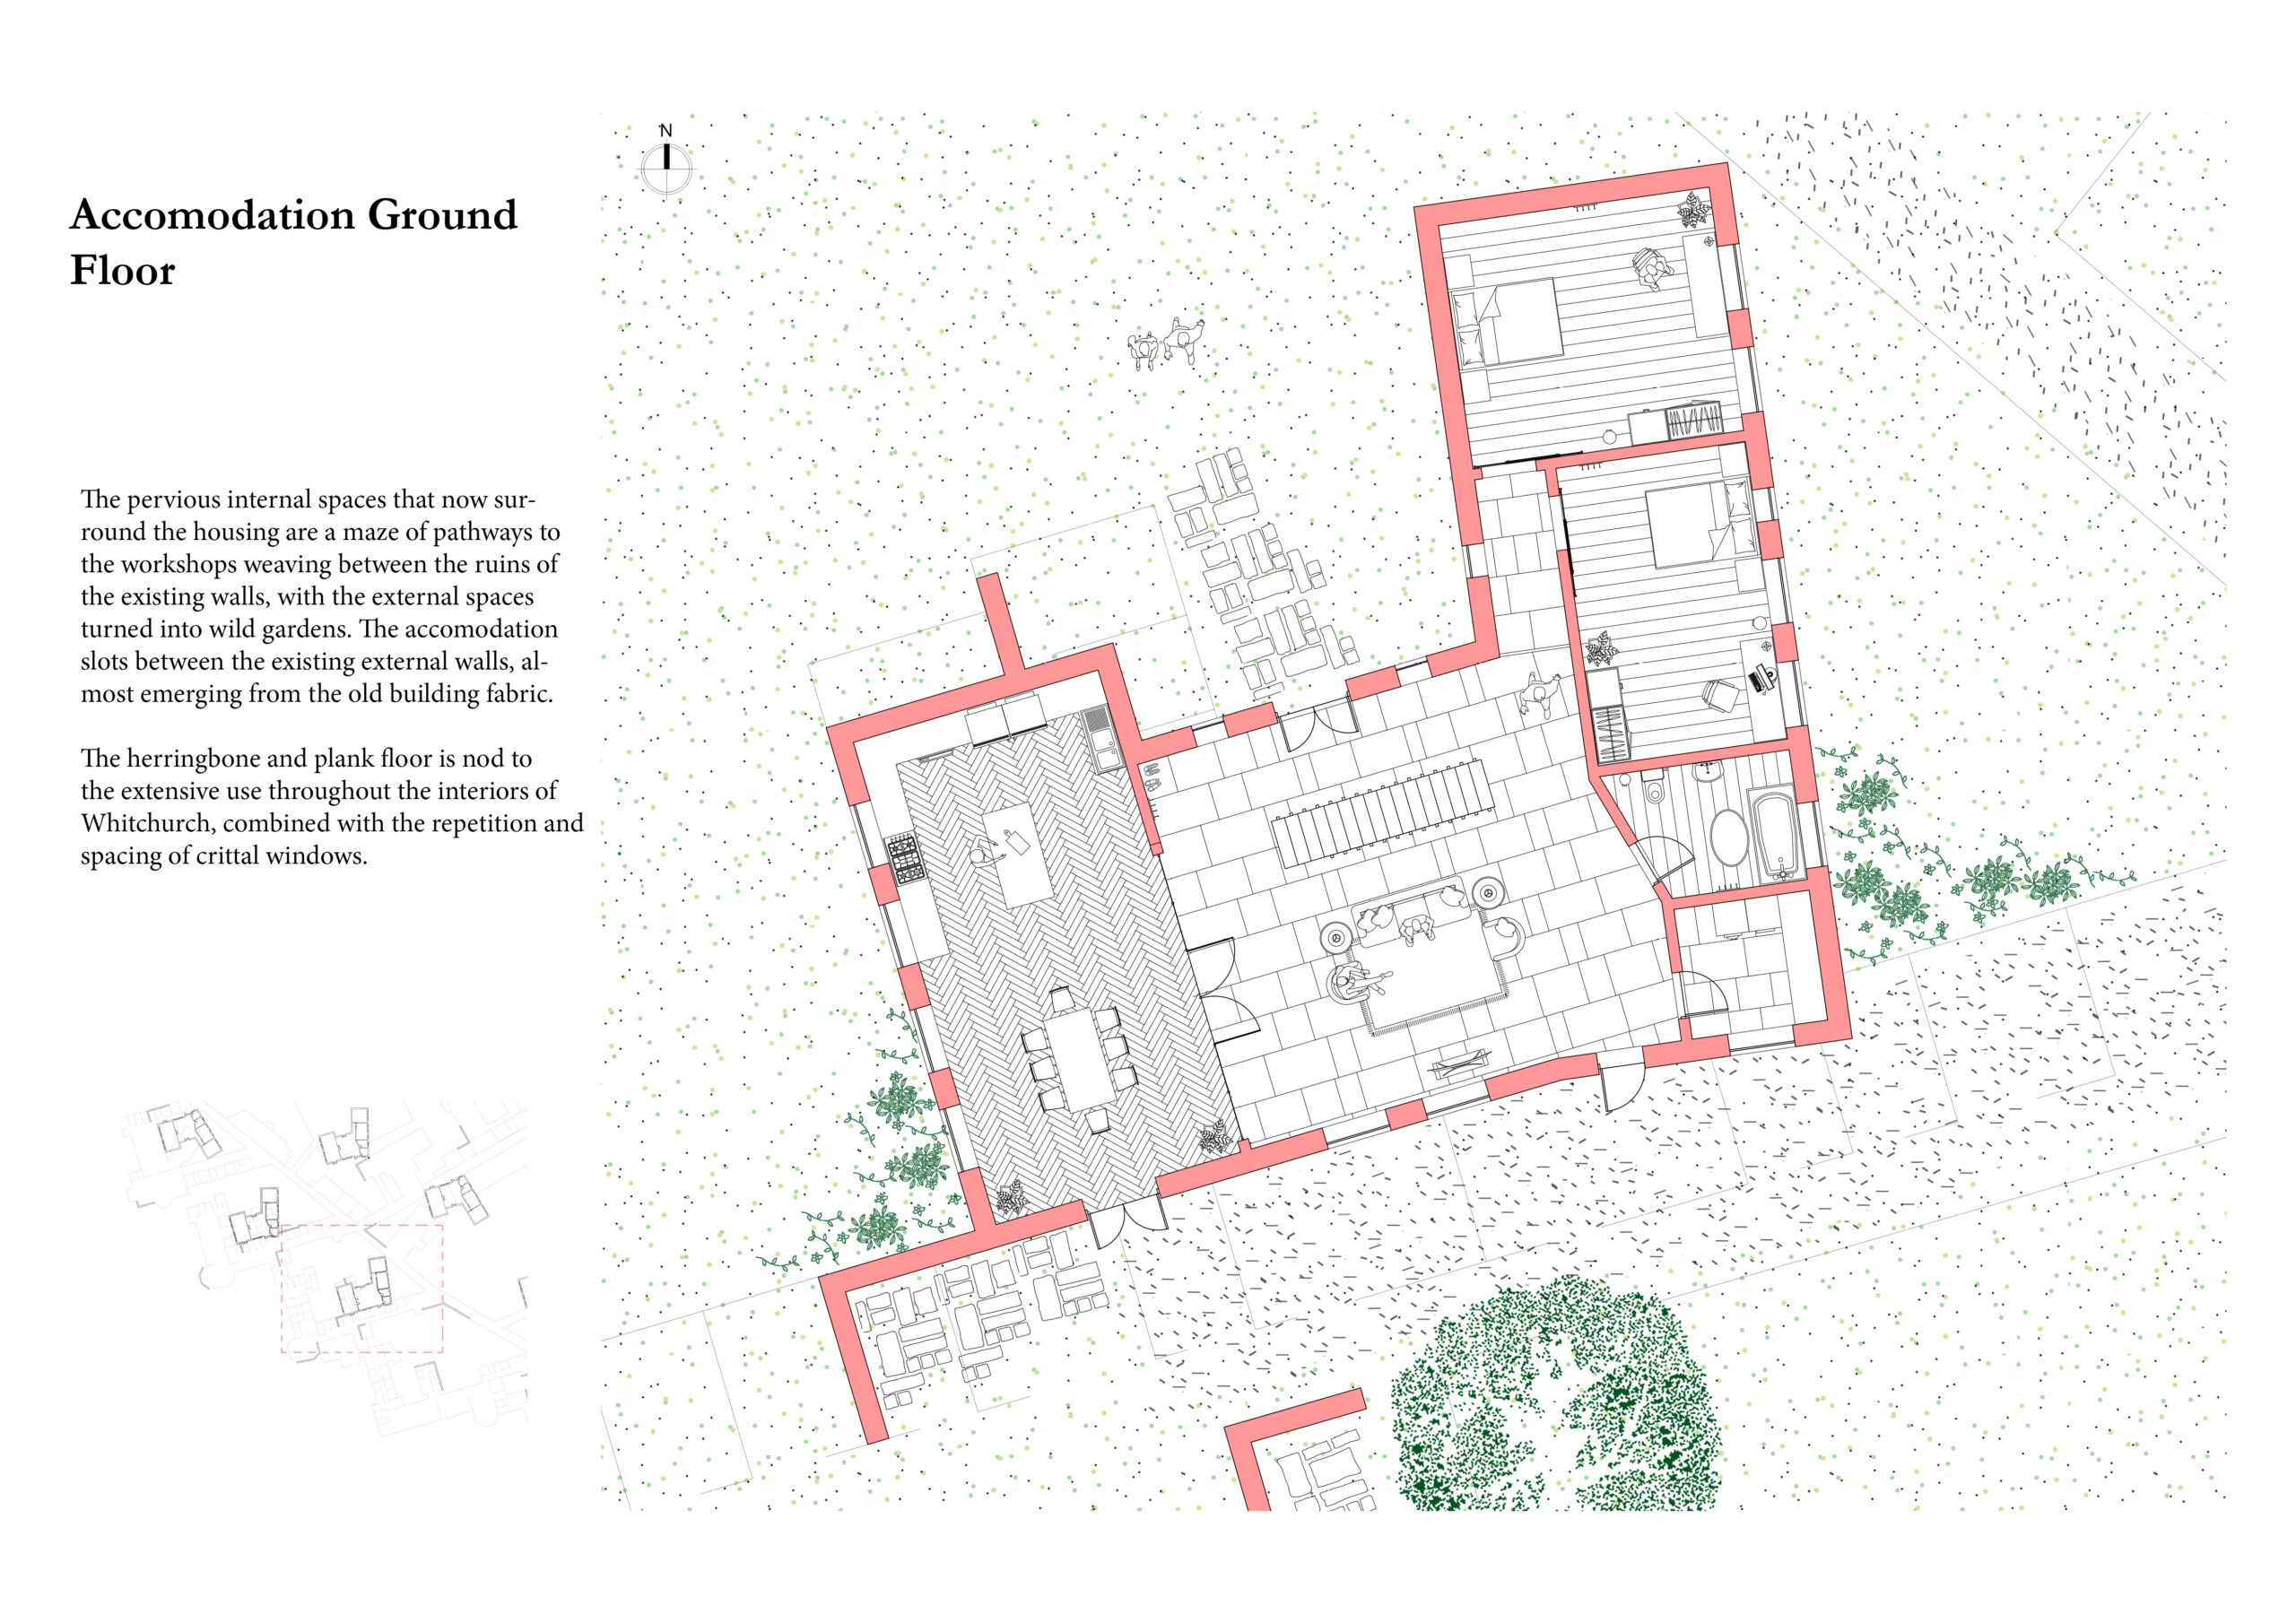 Portfolio Page of a plan of the Ground Floor Accommodation. The plans nave herringbone and plank floors that nod to the extensive use throughout the interiors of Whitchurch, combined with the repetition and spacing of crittal windows.